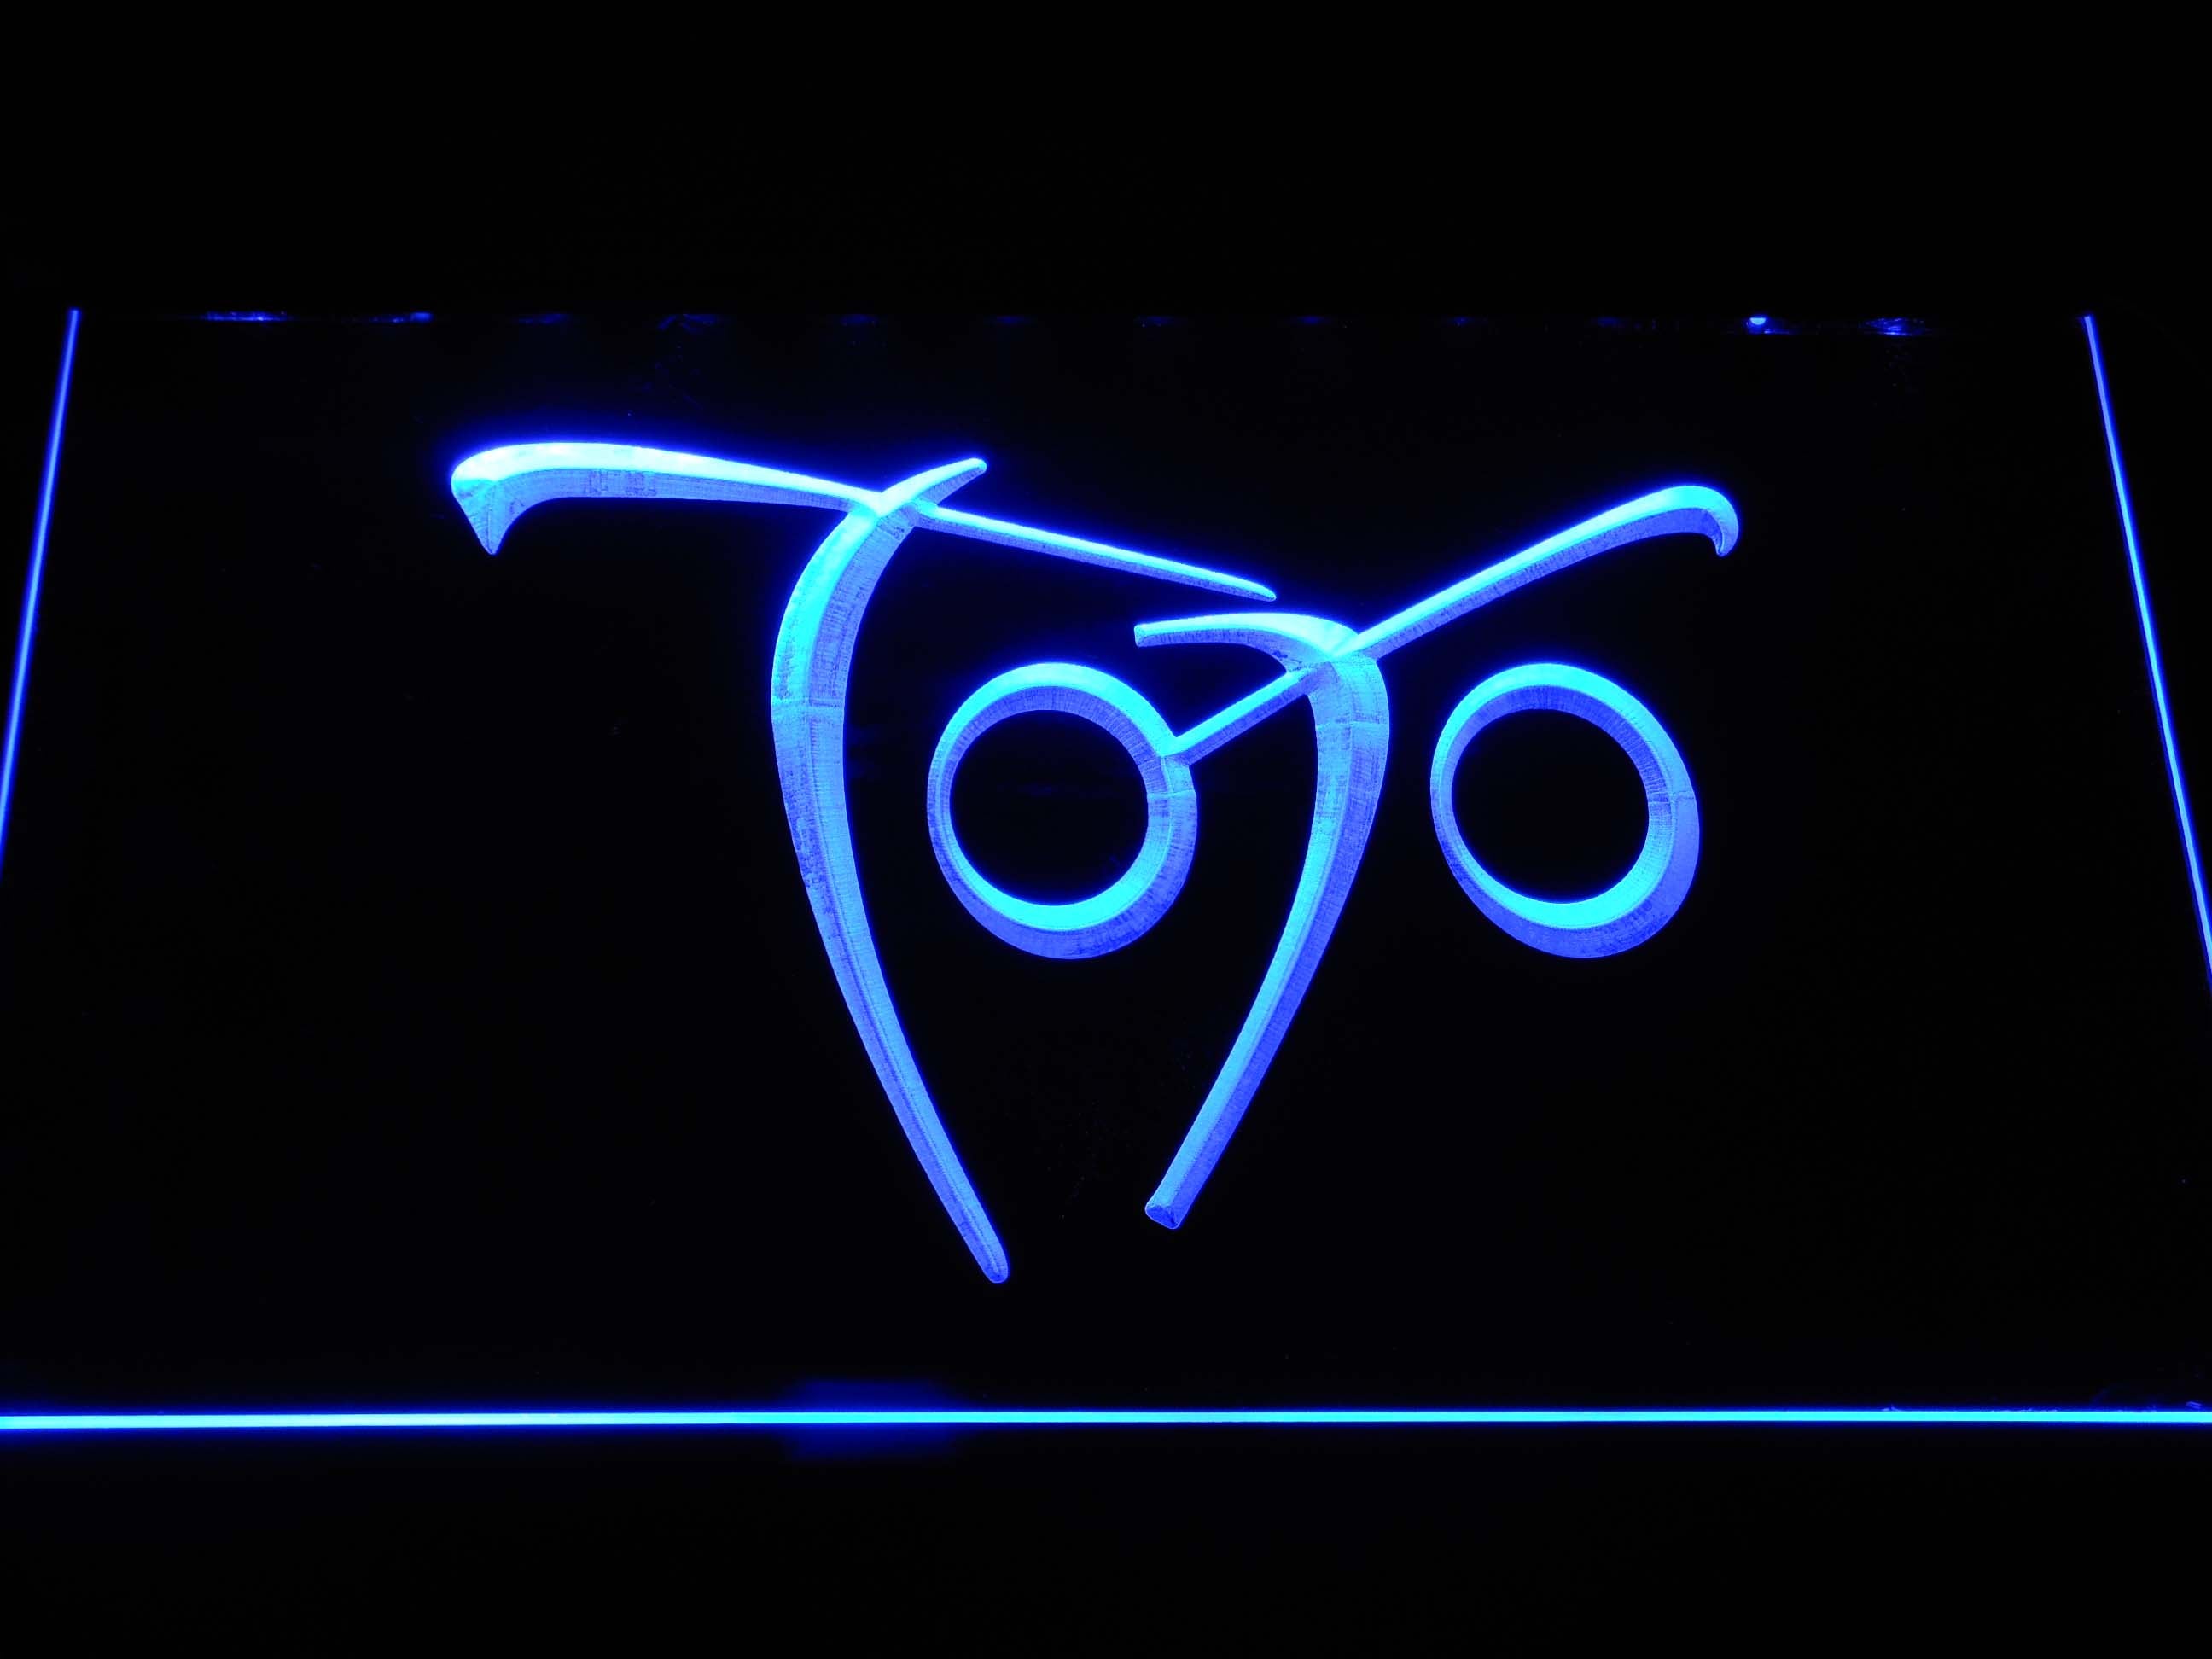 Toto Music Band Neon Light LED Sign